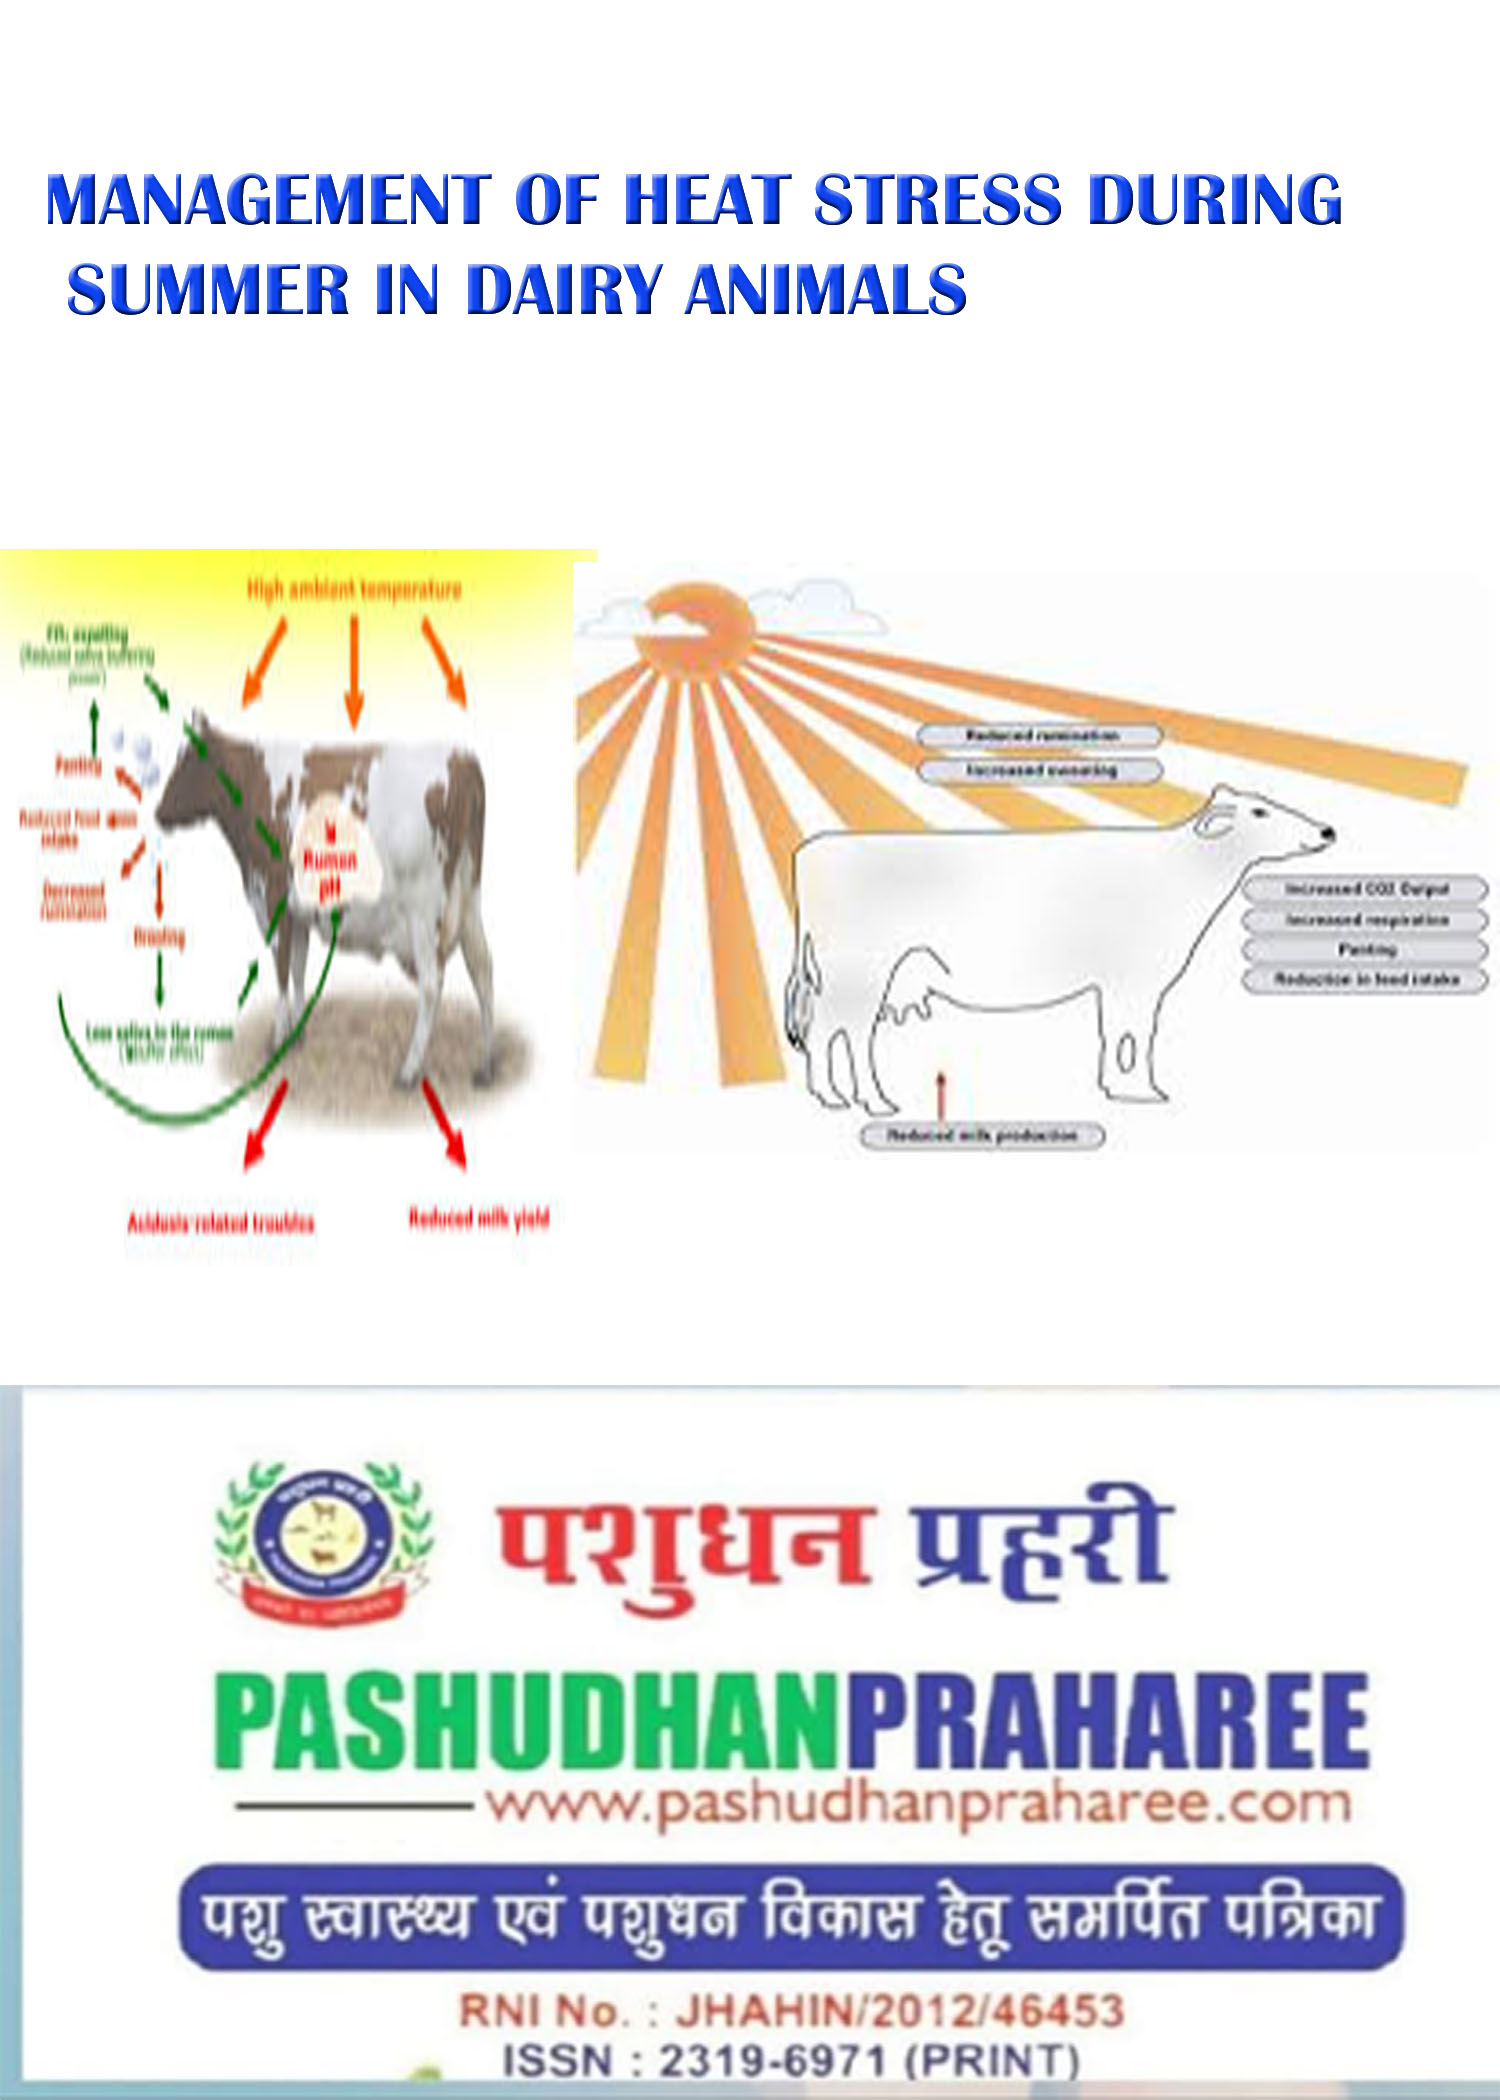 MANAGEMENT OF HEAT STRESS DURING SUMMER IN DAIRY ANIMALS – Pashudhan  praharee